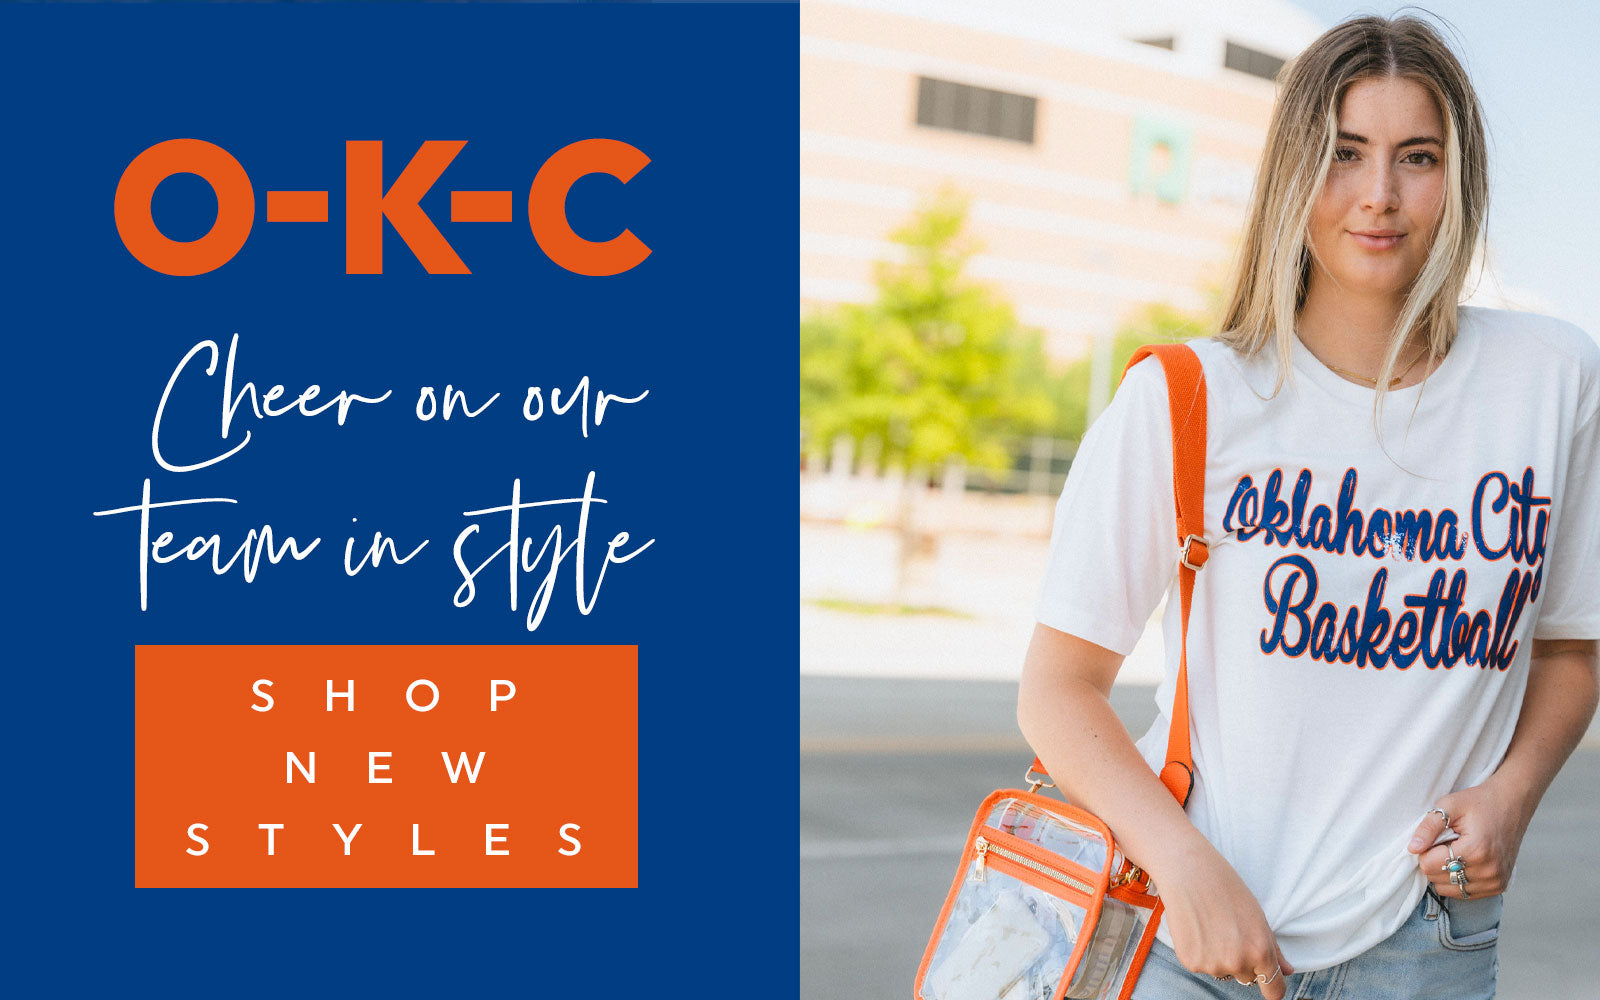 OKC basketball t-shirt from Lush Fashion Lounge boutique in Oklahoma City 